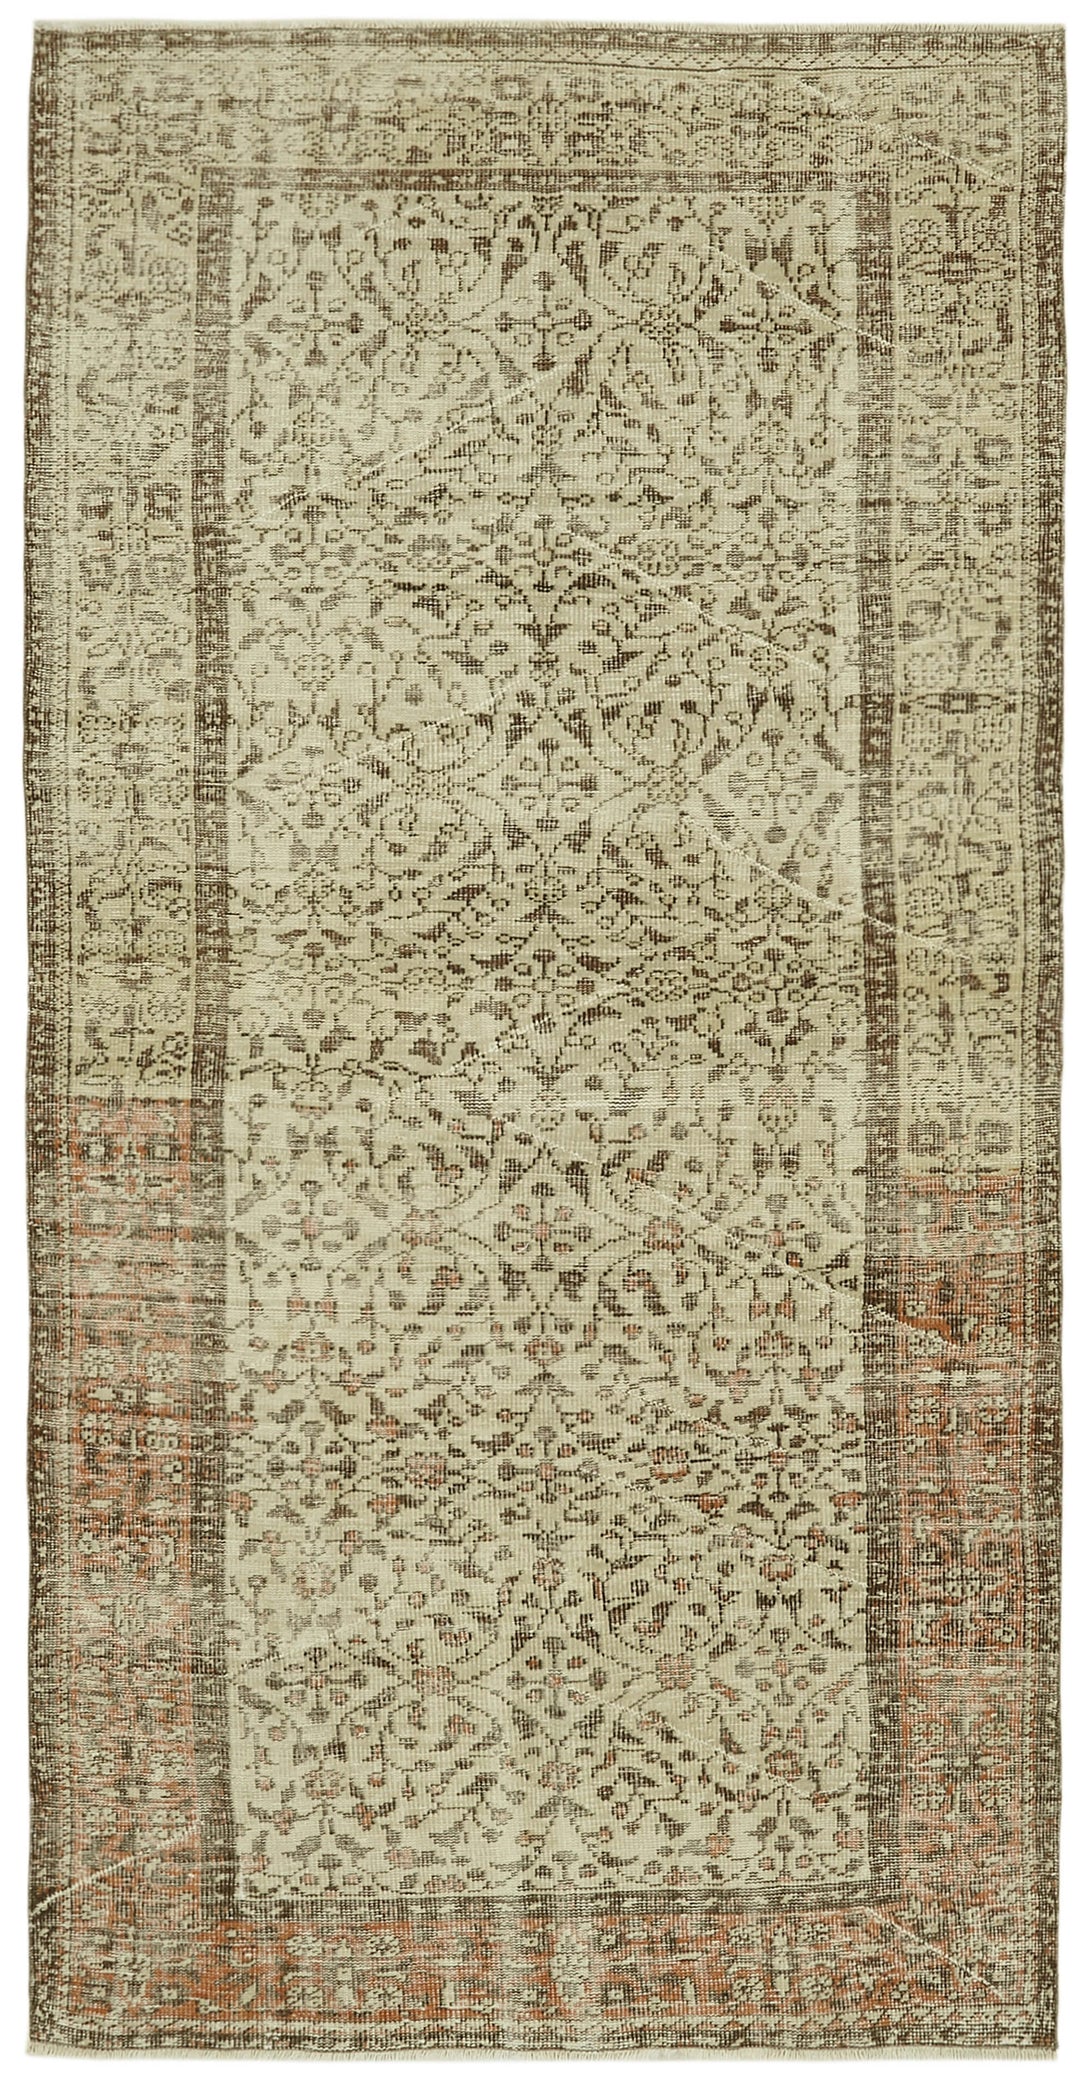 Handmade White Wash Area Rug > Design# OL-AC-41737 > Size: 5'-0" x 9'-5", Carpet Culture Rugs, Handmade Rugs, NYC Rugs, New Rugs, Shop Rugs, Rug Store, Outlet Rugs, SoHo Rugs, Rugs in USA